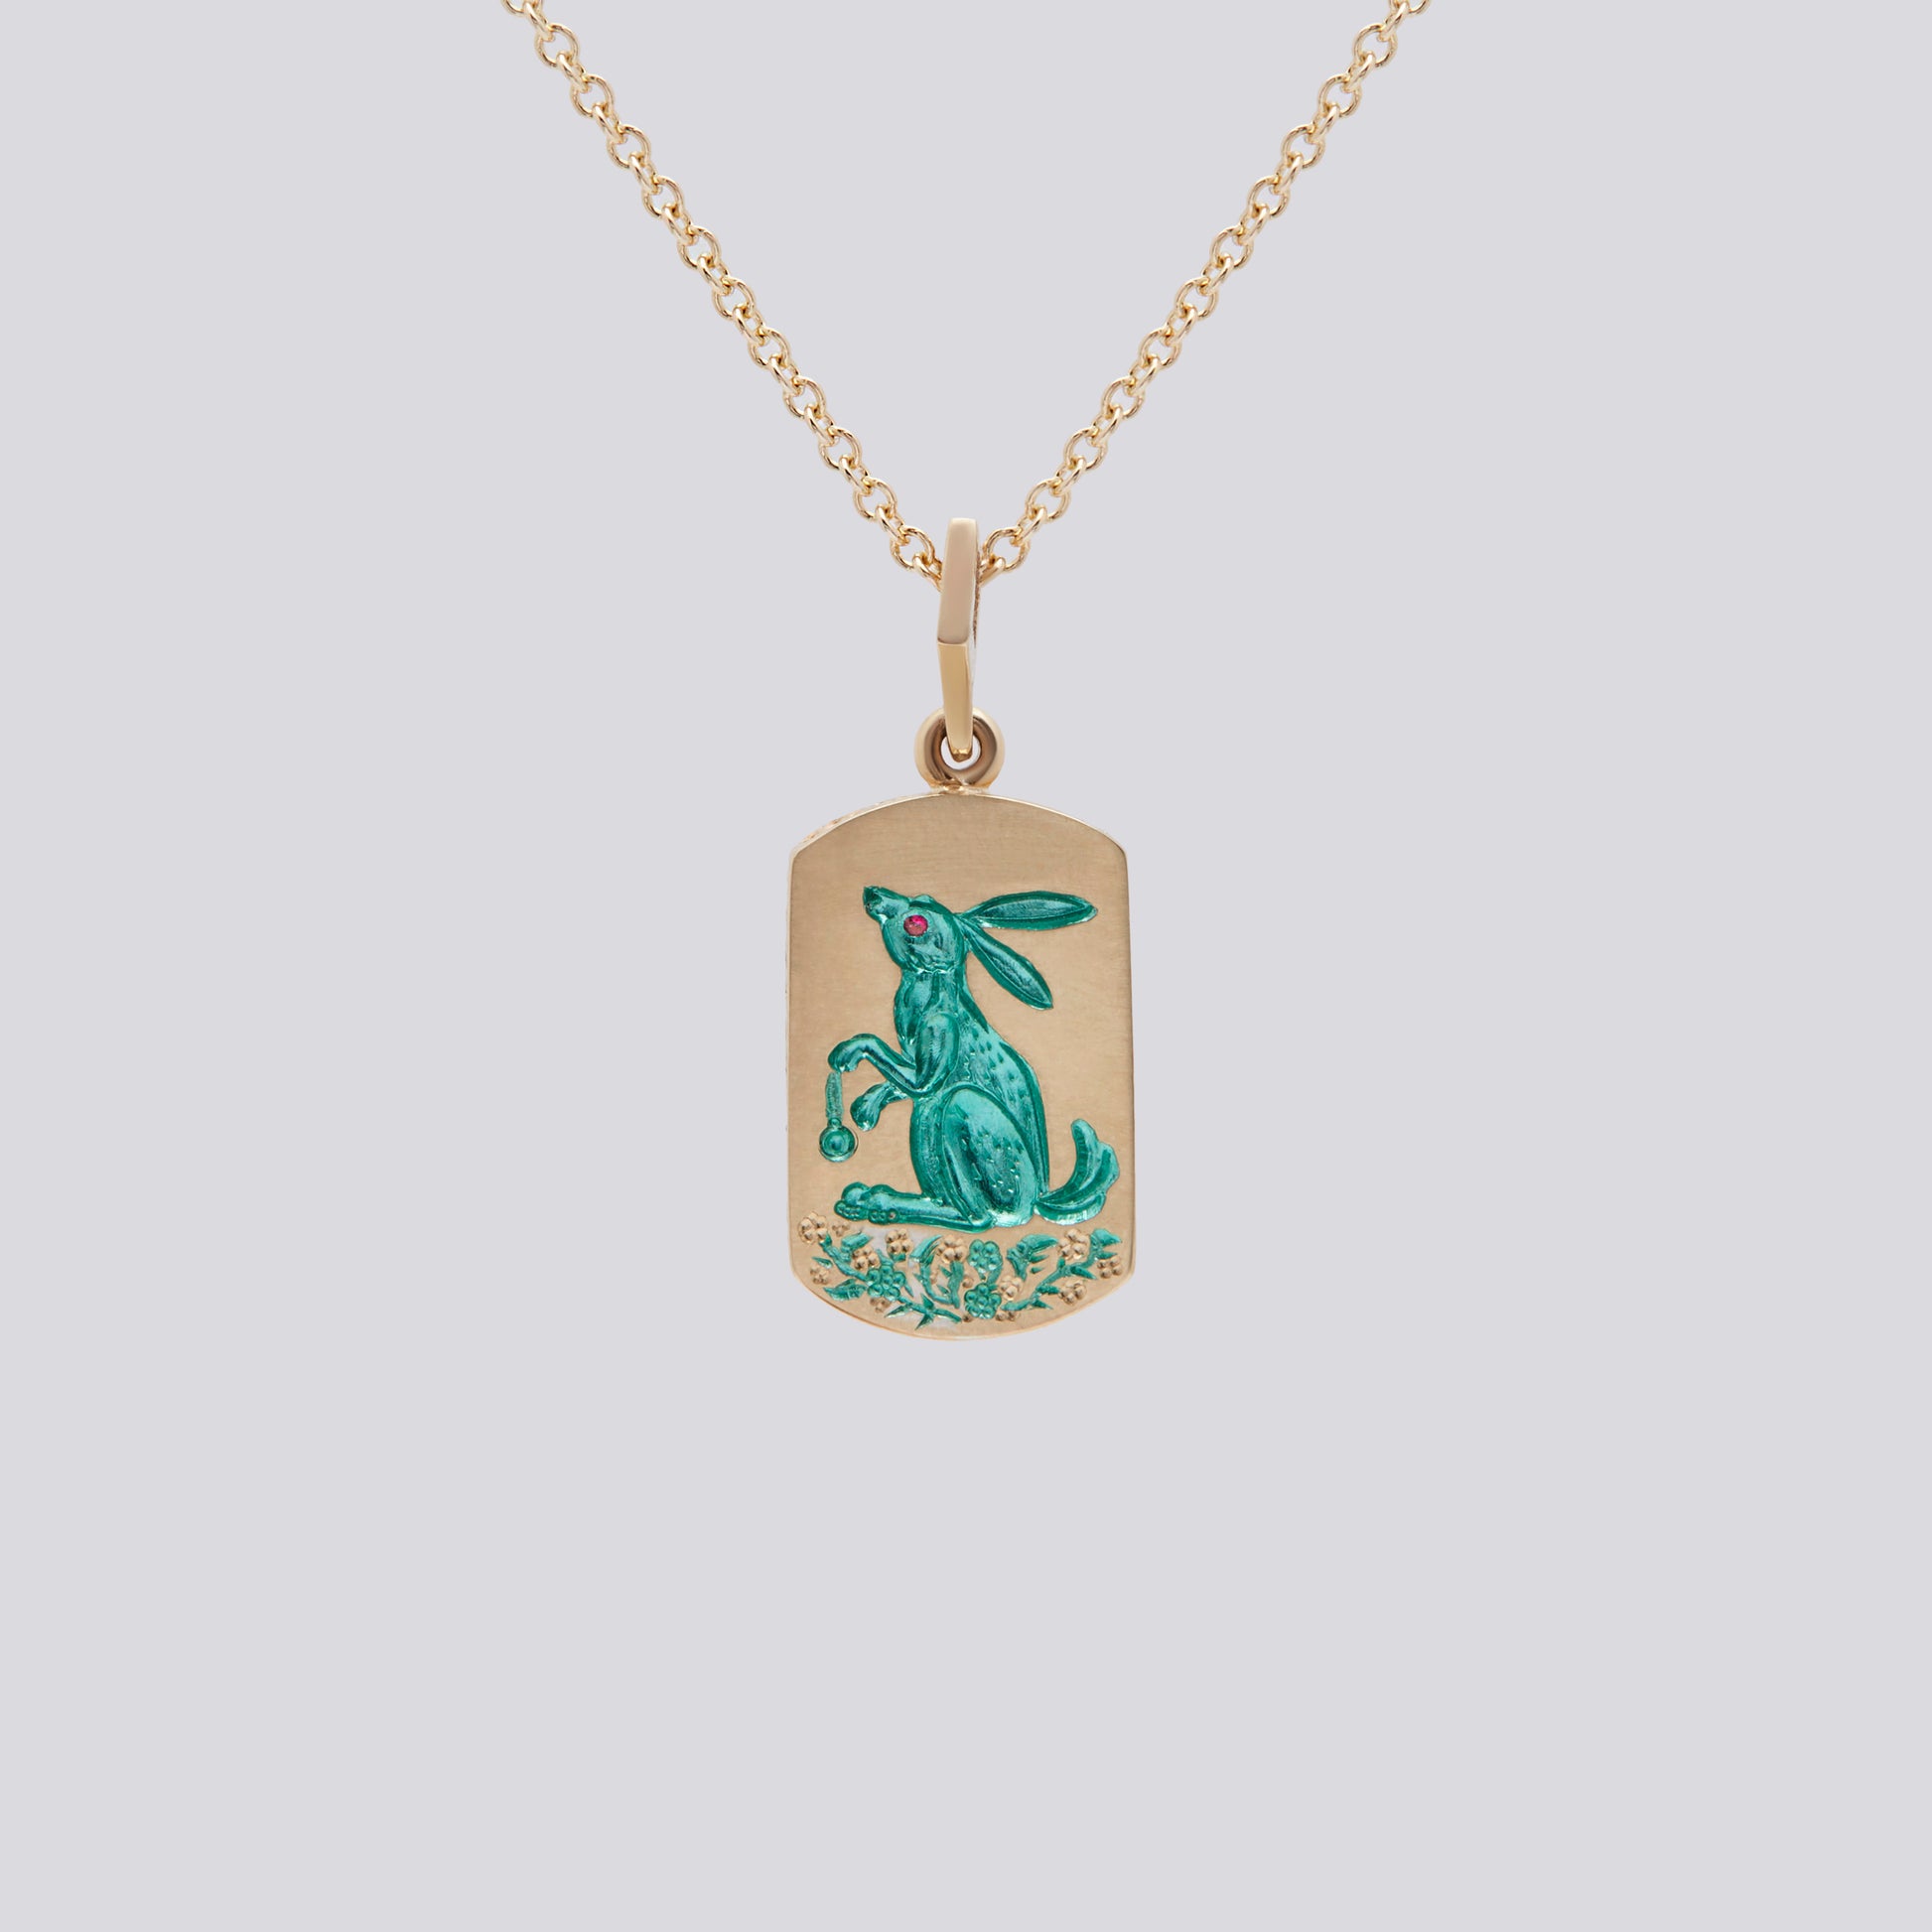 Castro Smith Jewelry Gold Rabbit Pendant Necklace with Green Engravings.